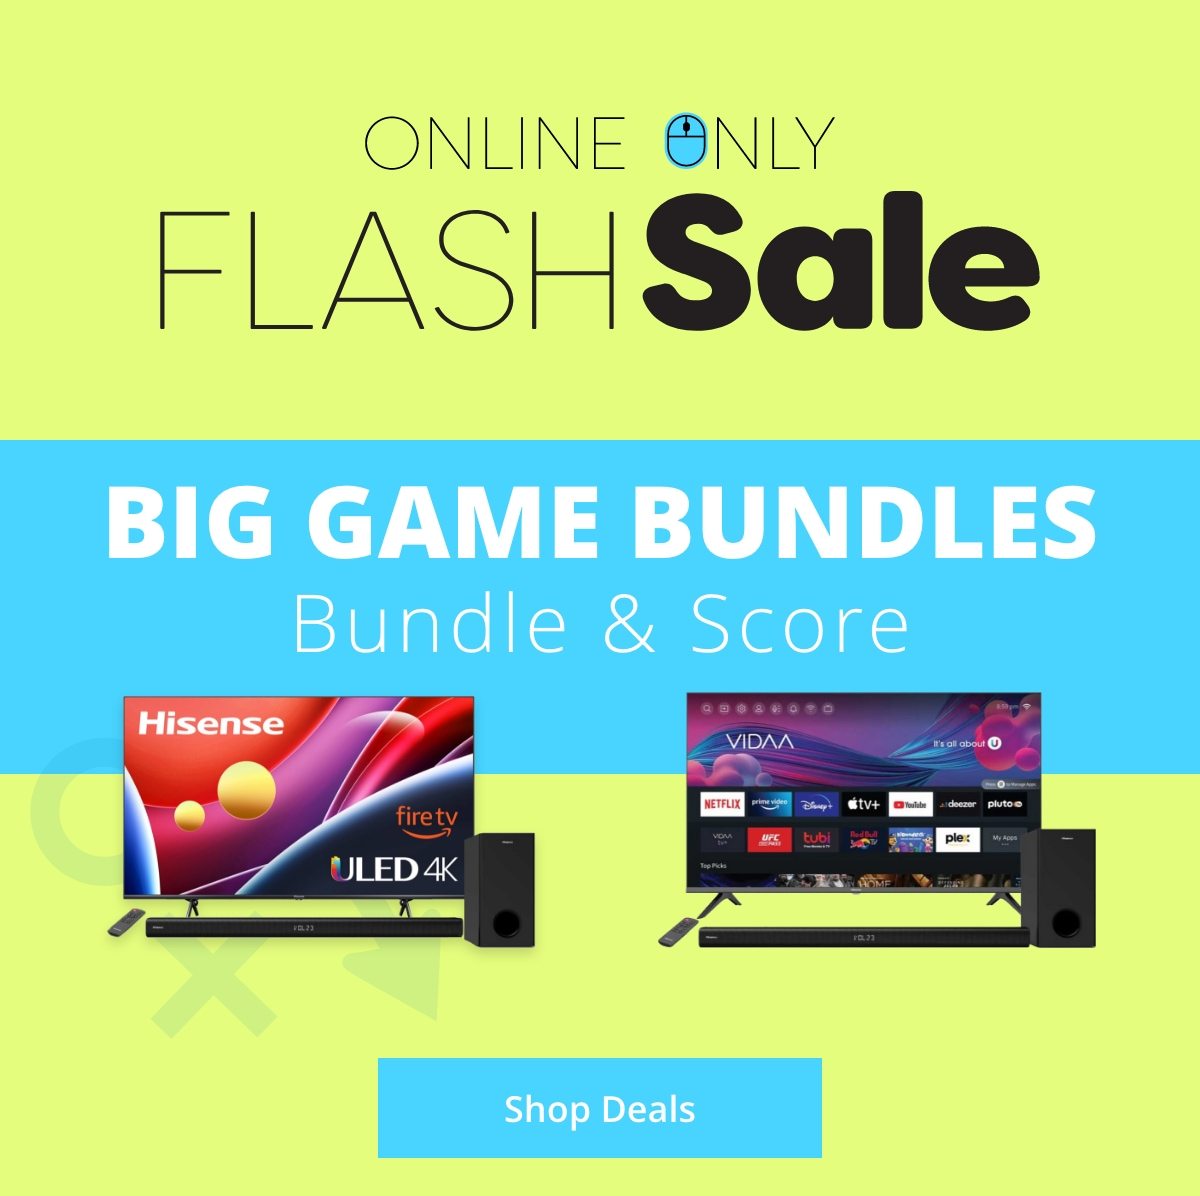 Big Game Bundles available online only